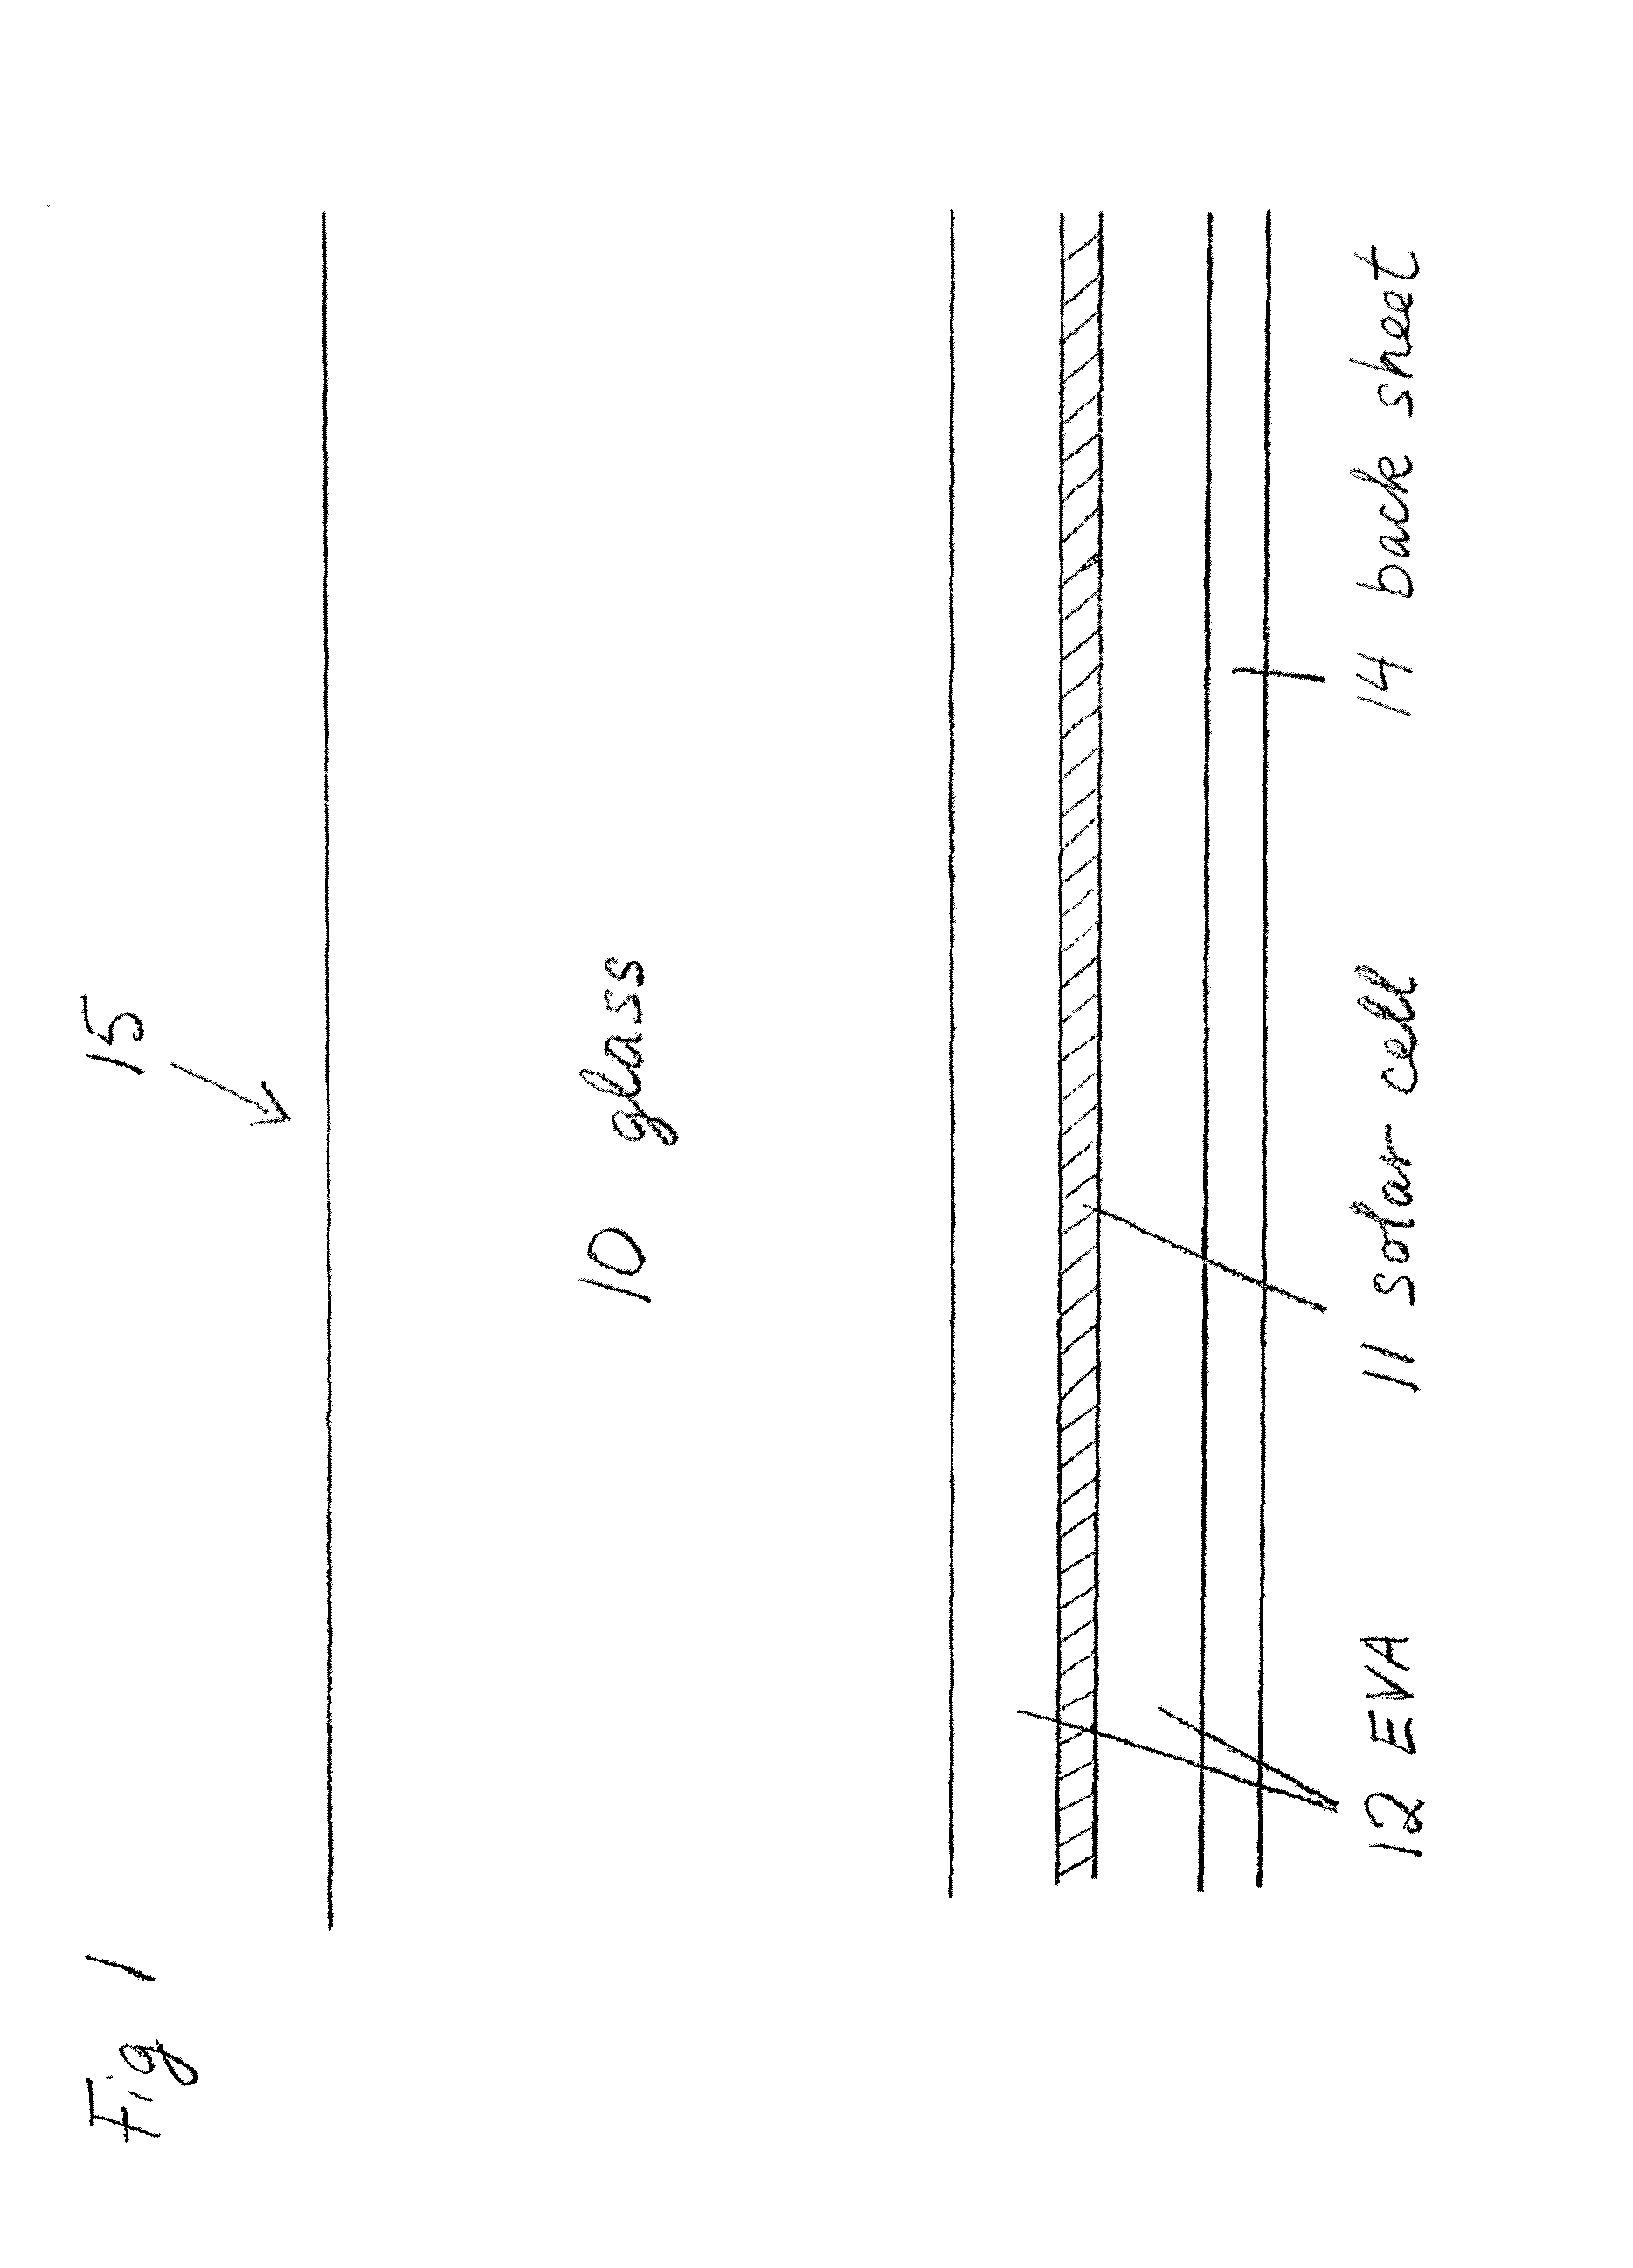 Photo voltaic generator panel, method and system